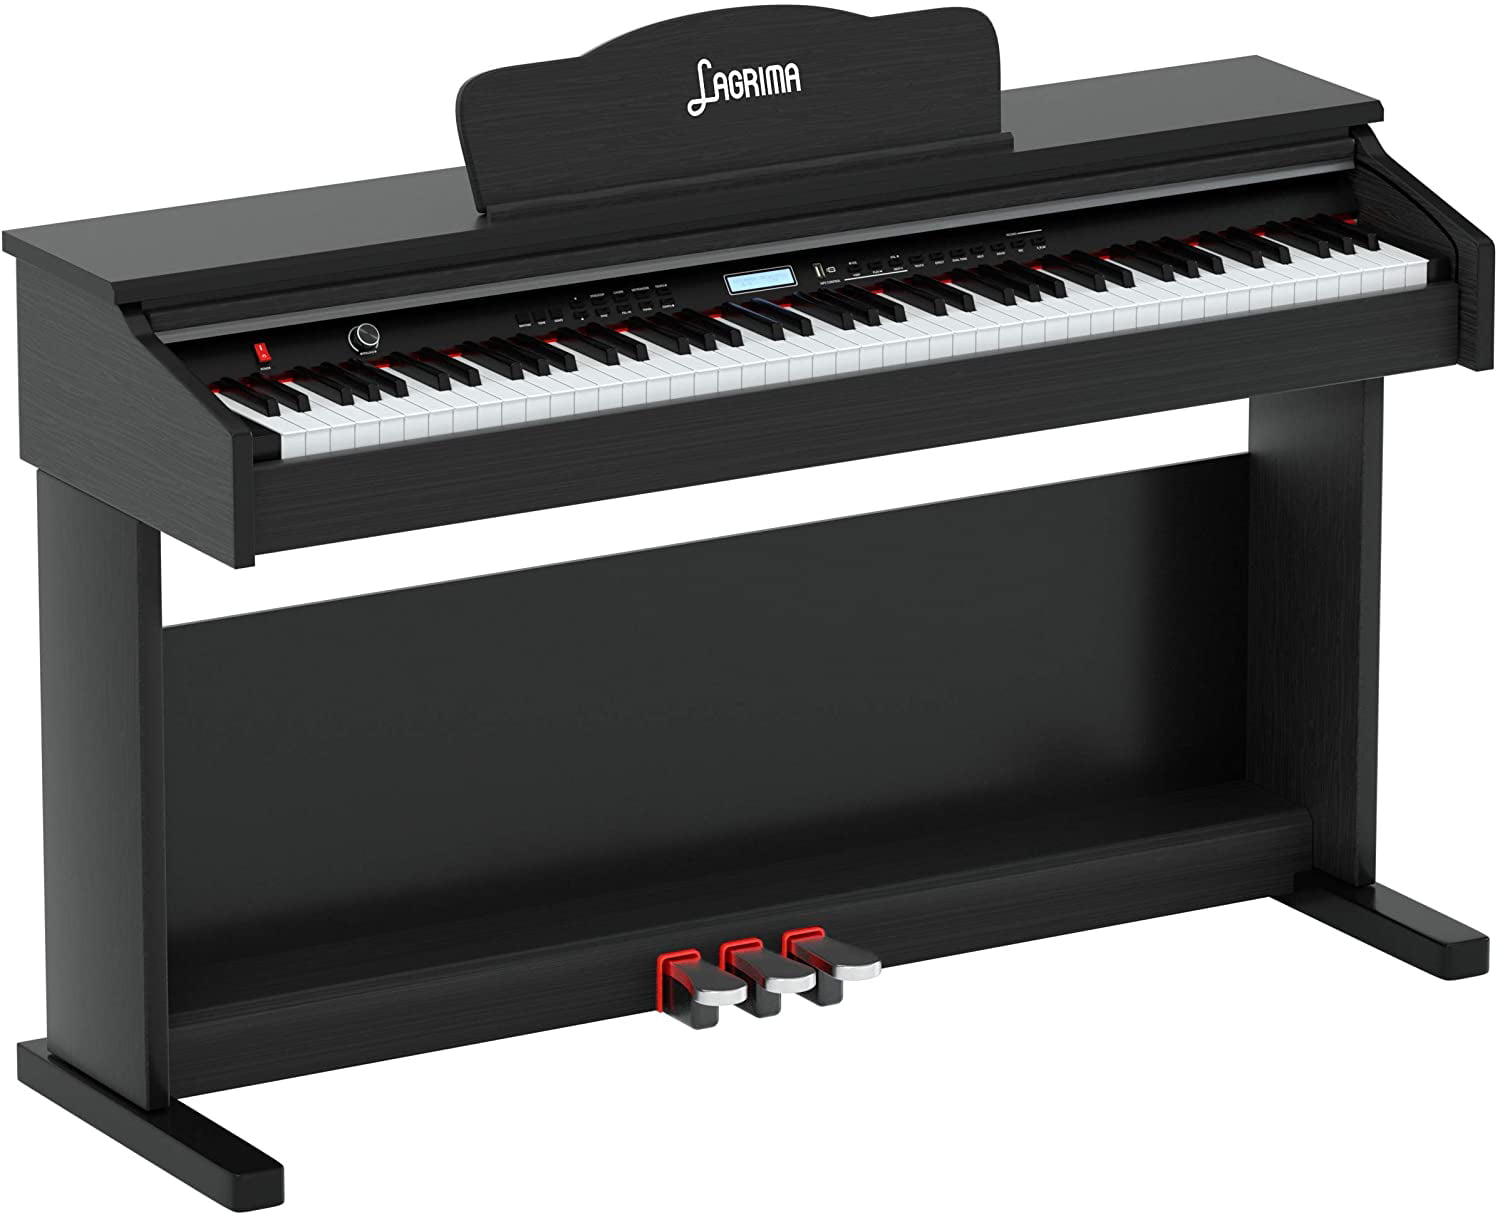 88 Key Electric Keyboard Piano for Beginner/Adults with Padded Piano Bench+Music Stand+Power Adapter+3-Pedal Board+Instruction+Headphone Jack LAGRIMA Digital Piano Black With 2 Person Bench 